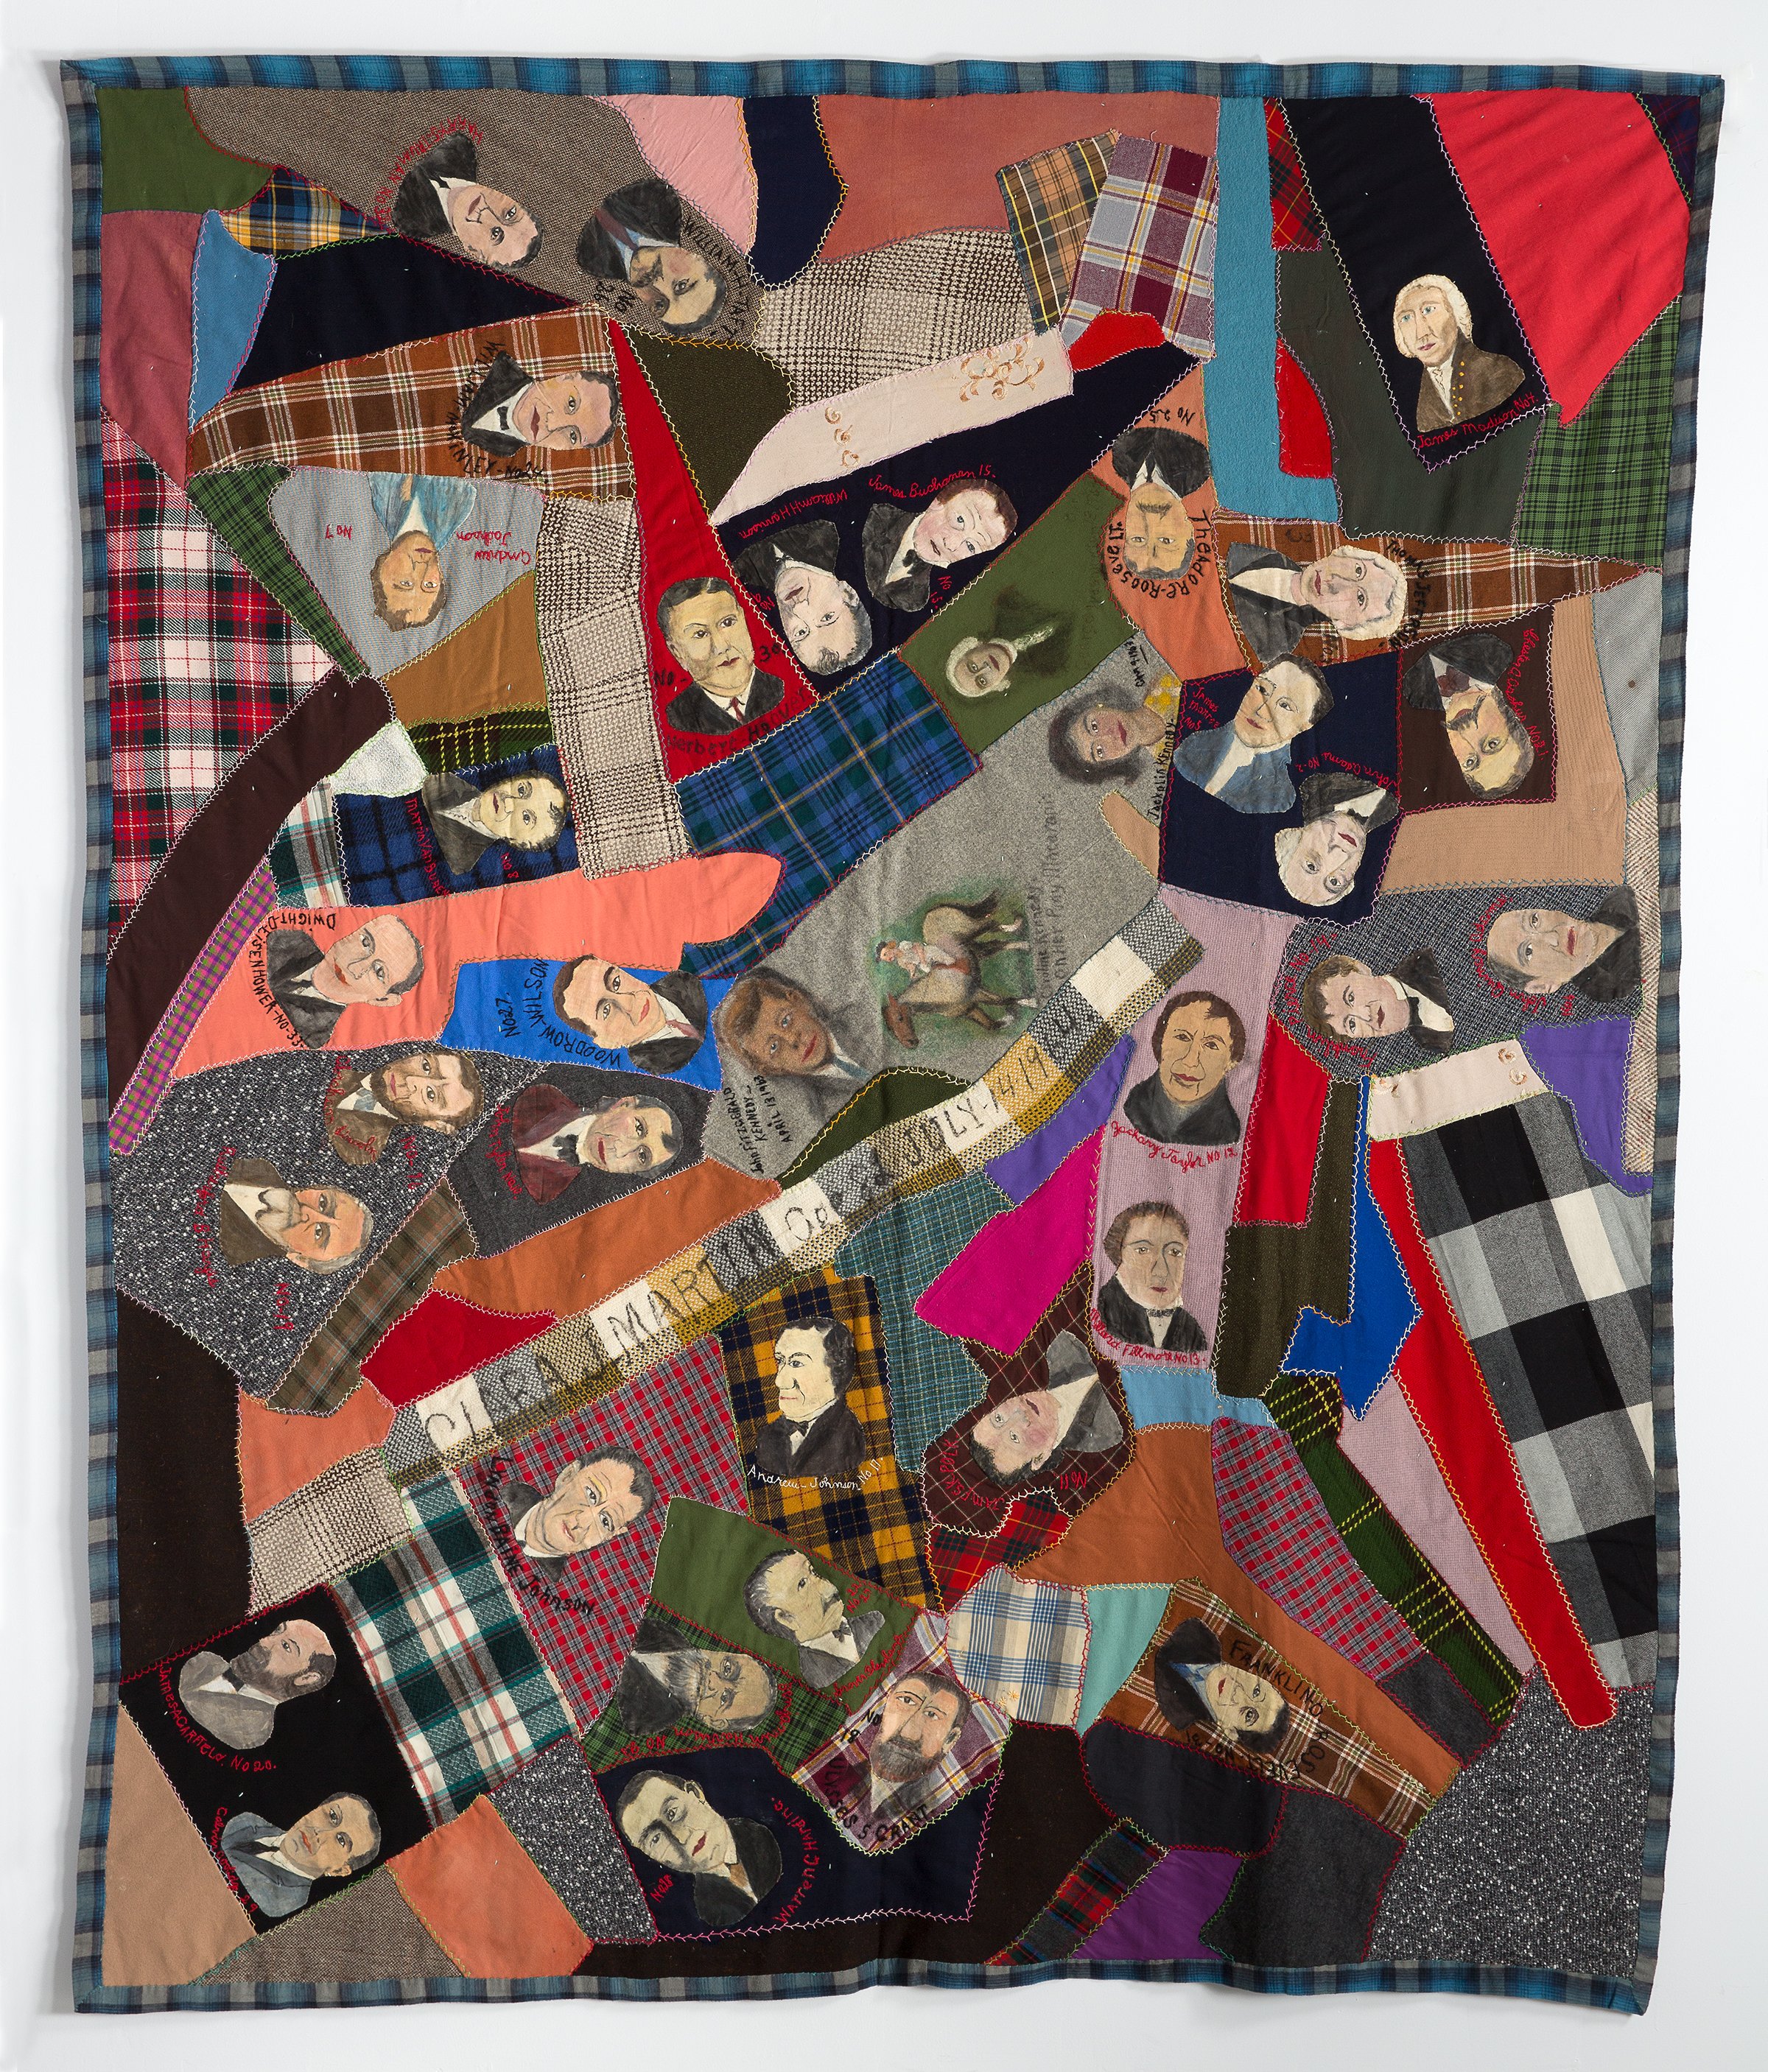  Clara J. Martin (1882–1968),  Presidents Quilt , 1964, wool with paint on canvas appliqué and cotton embroidery, 88 x 72 inches. Collection American Folk Art Museum, New York. Gift of Marta Amundson; great-granddaughter of Clara J. Martin, 2015.2.1.